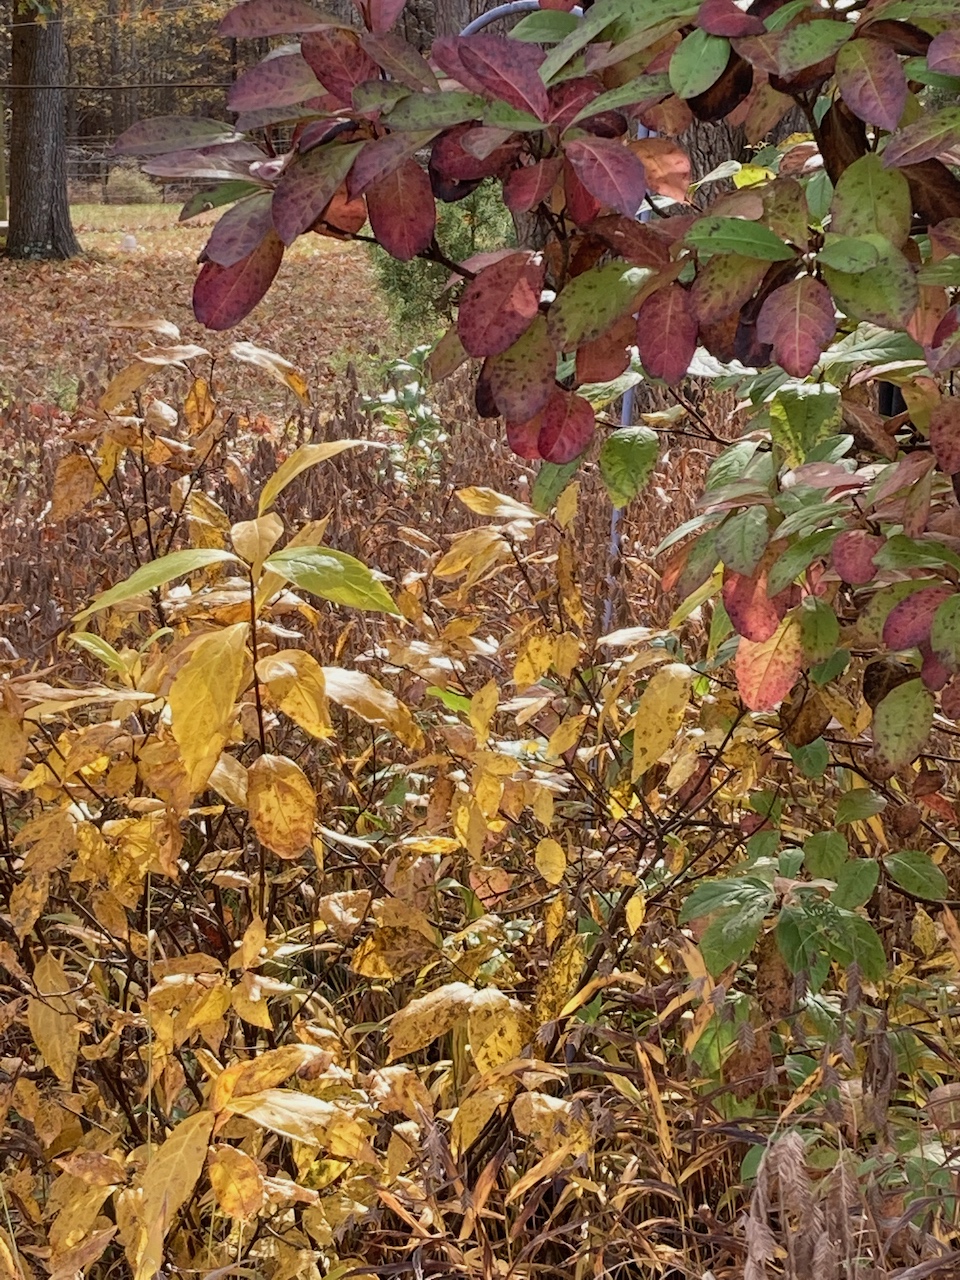 The Scientific Name is Calycanthus floridus. You will likely hear them called Sweet shrub; Sweet Betsy, Carolina allspice. This picture shows the The bright yellow leaves in the Fall makes a pretty contrast of colors planted with <em>Viburnum nudum </em>(background). of Calycanthus floridus